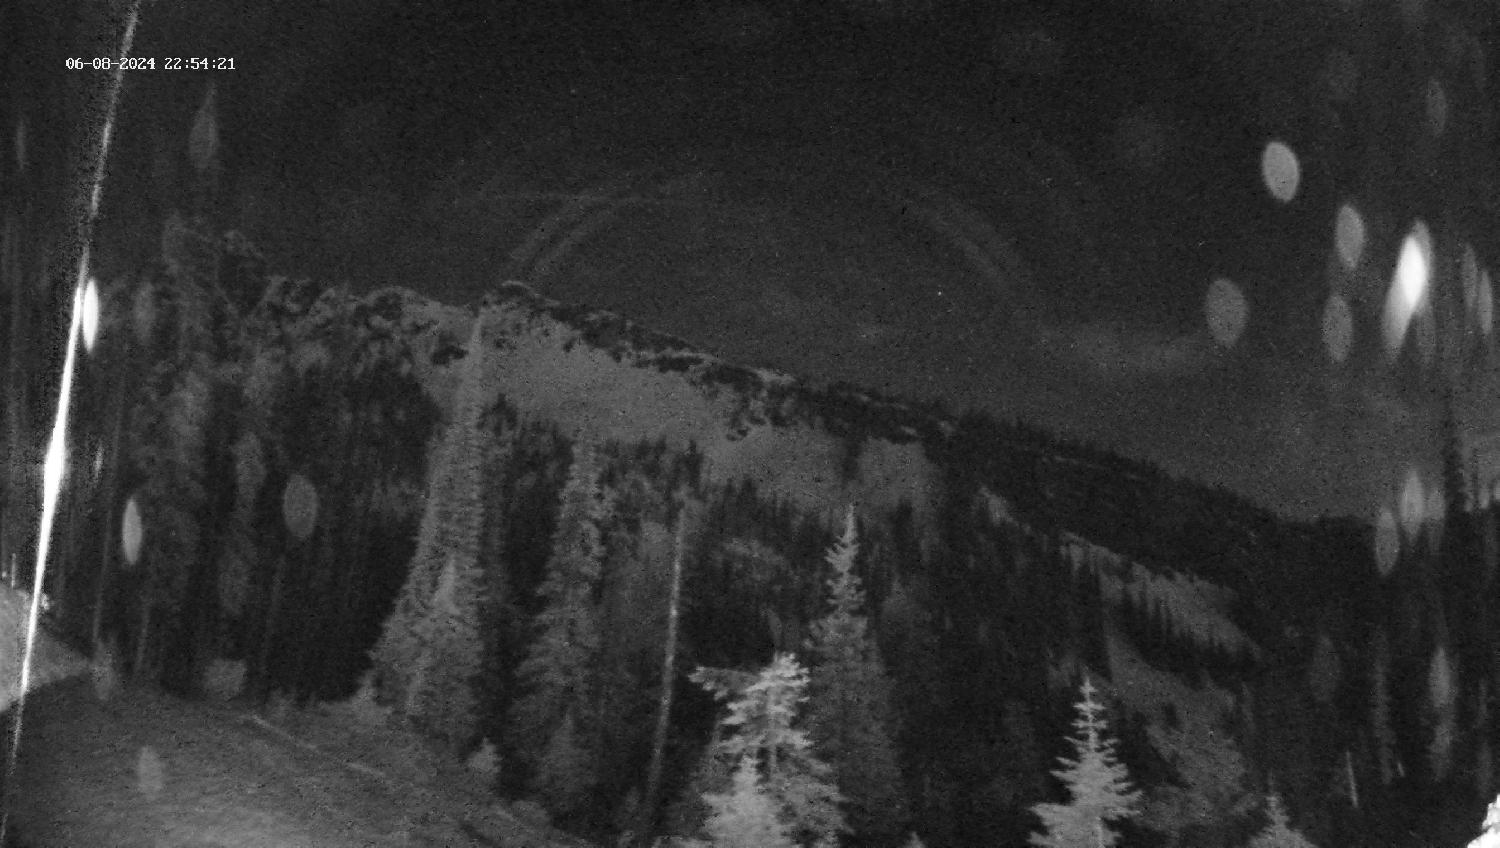 Top of Ripper Chair | Revelstoke cams